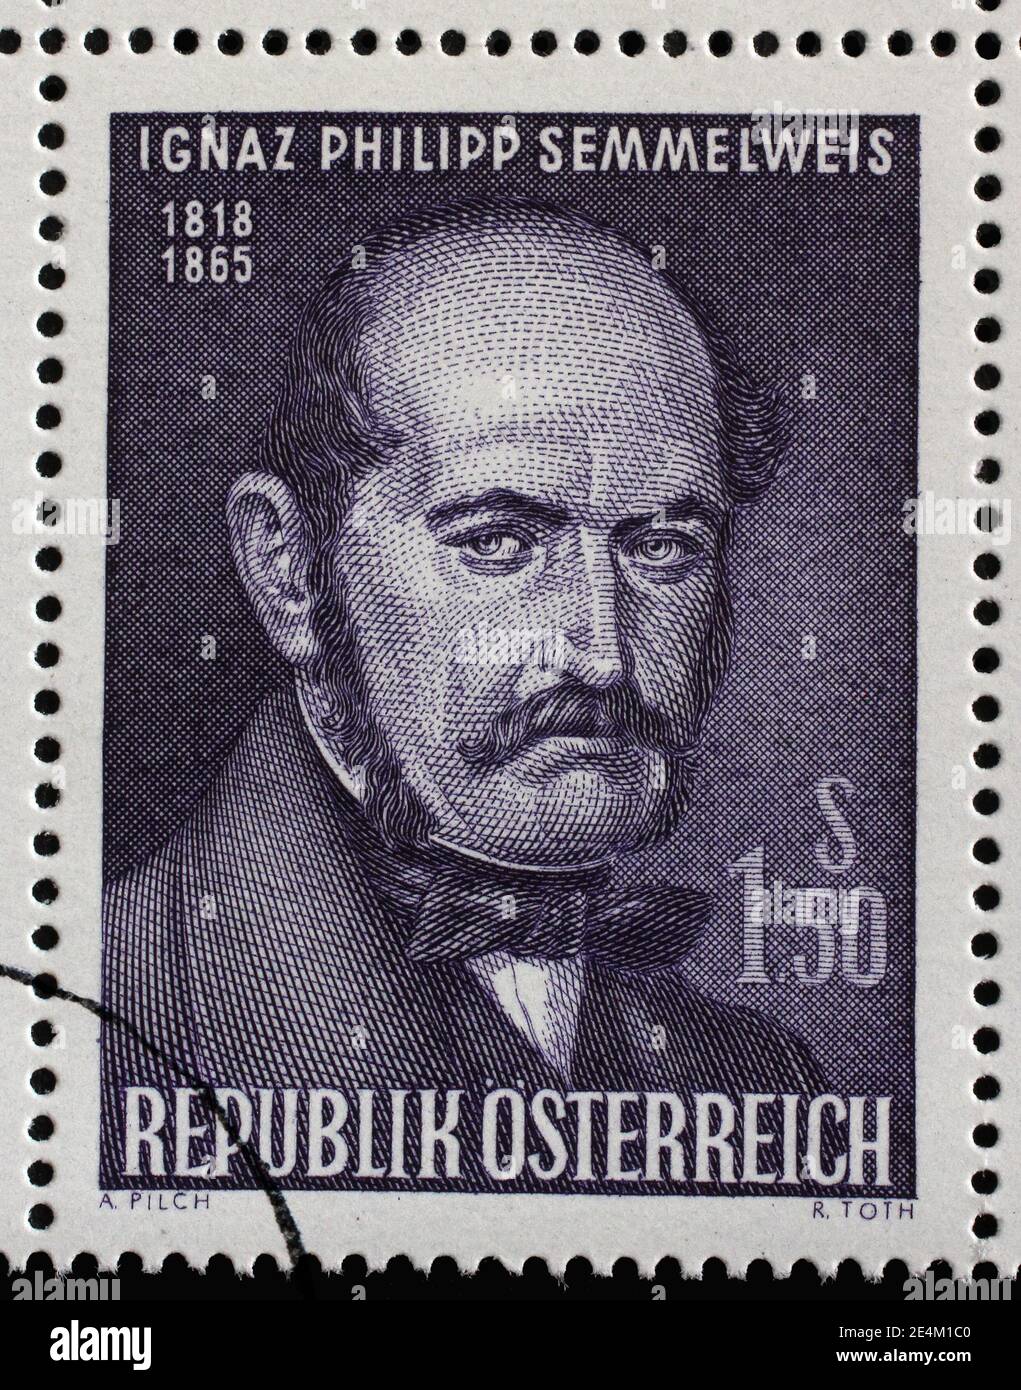 Stamp issued in Austria shows Ignaz Philipp Semmelweis - Hungarian physician, now known as an early pioneer of antiseptic procedures, circa 1965 Stock Photo